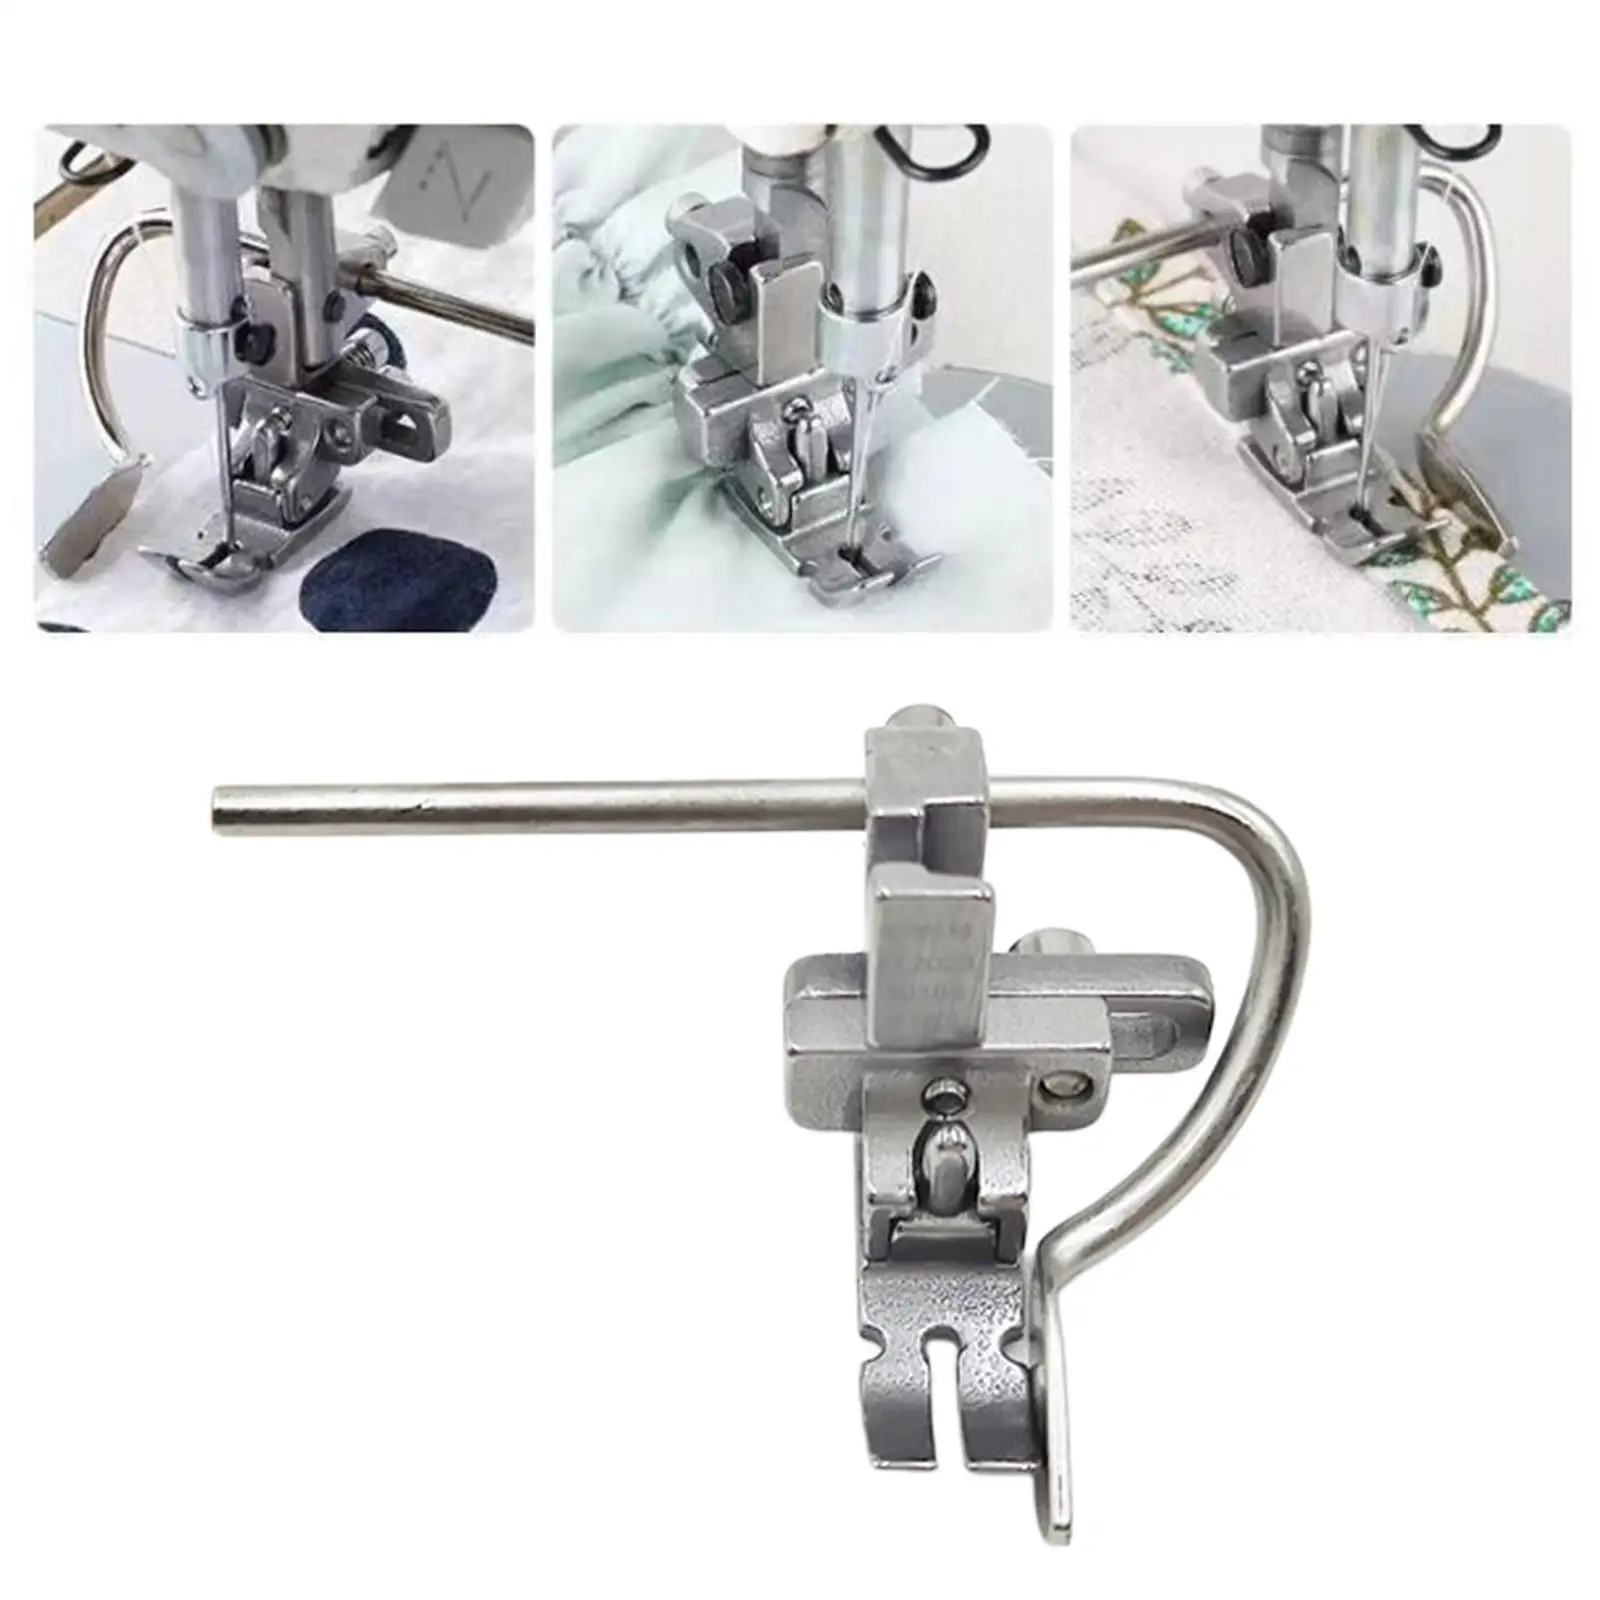 Presser Foot for Sewing Machine Quilting Patchwork Presser Foot for DIY Arts Crafts Embroidery Machine Clothes Leather Crafts